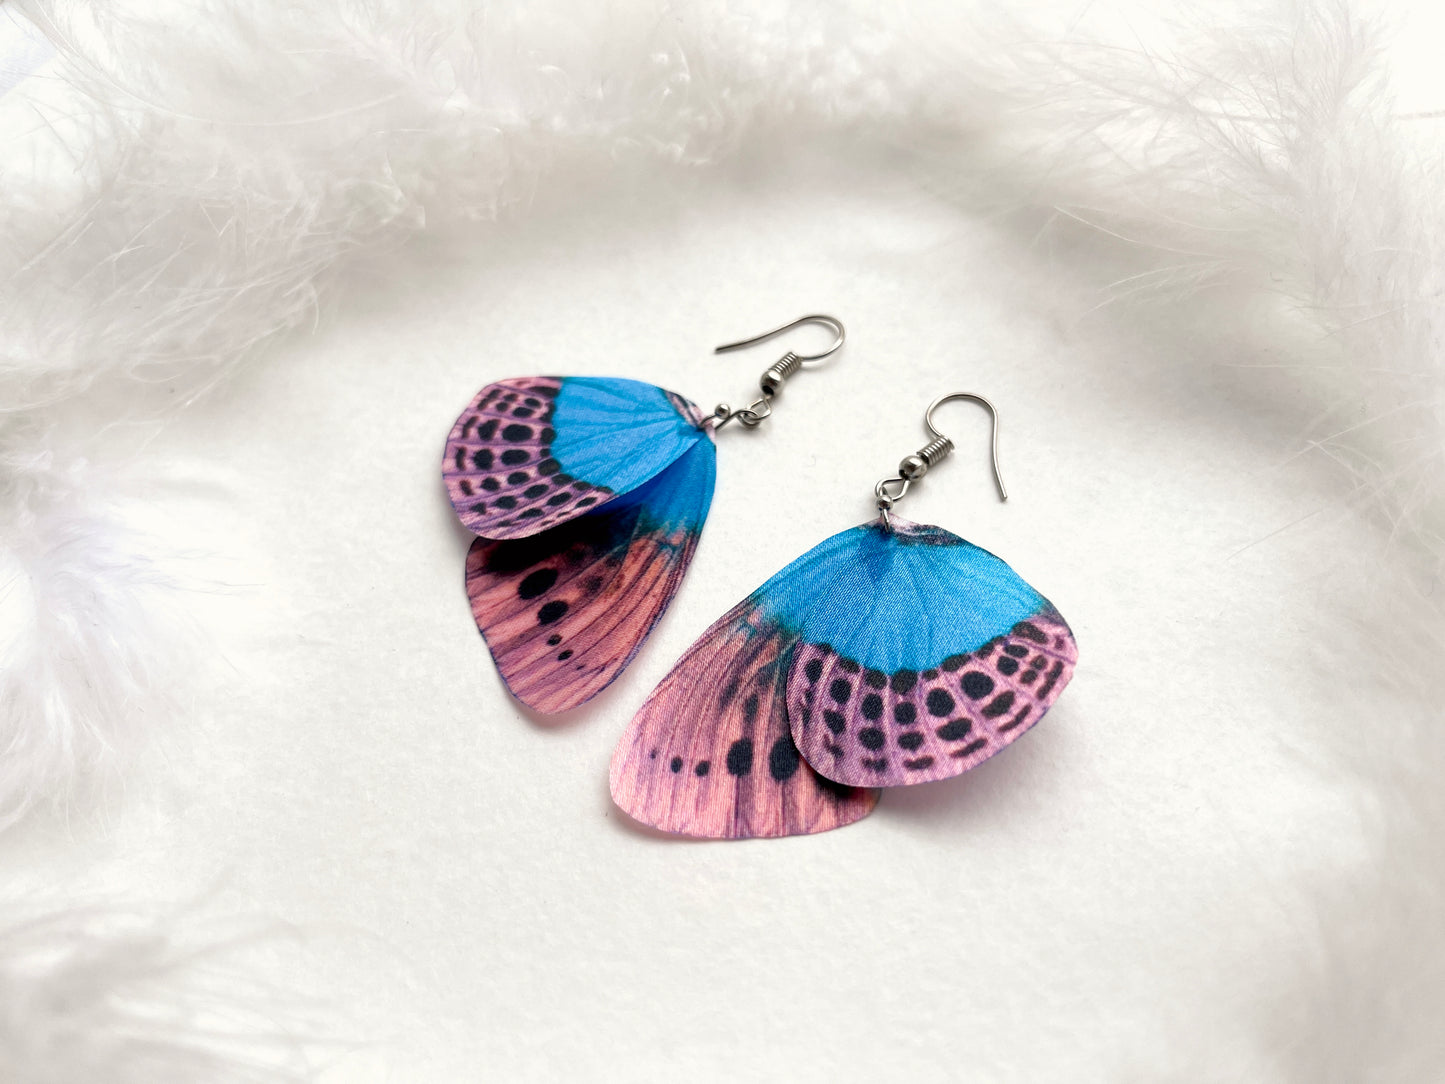 Mariposa butterfly earrings in pink and leopard design